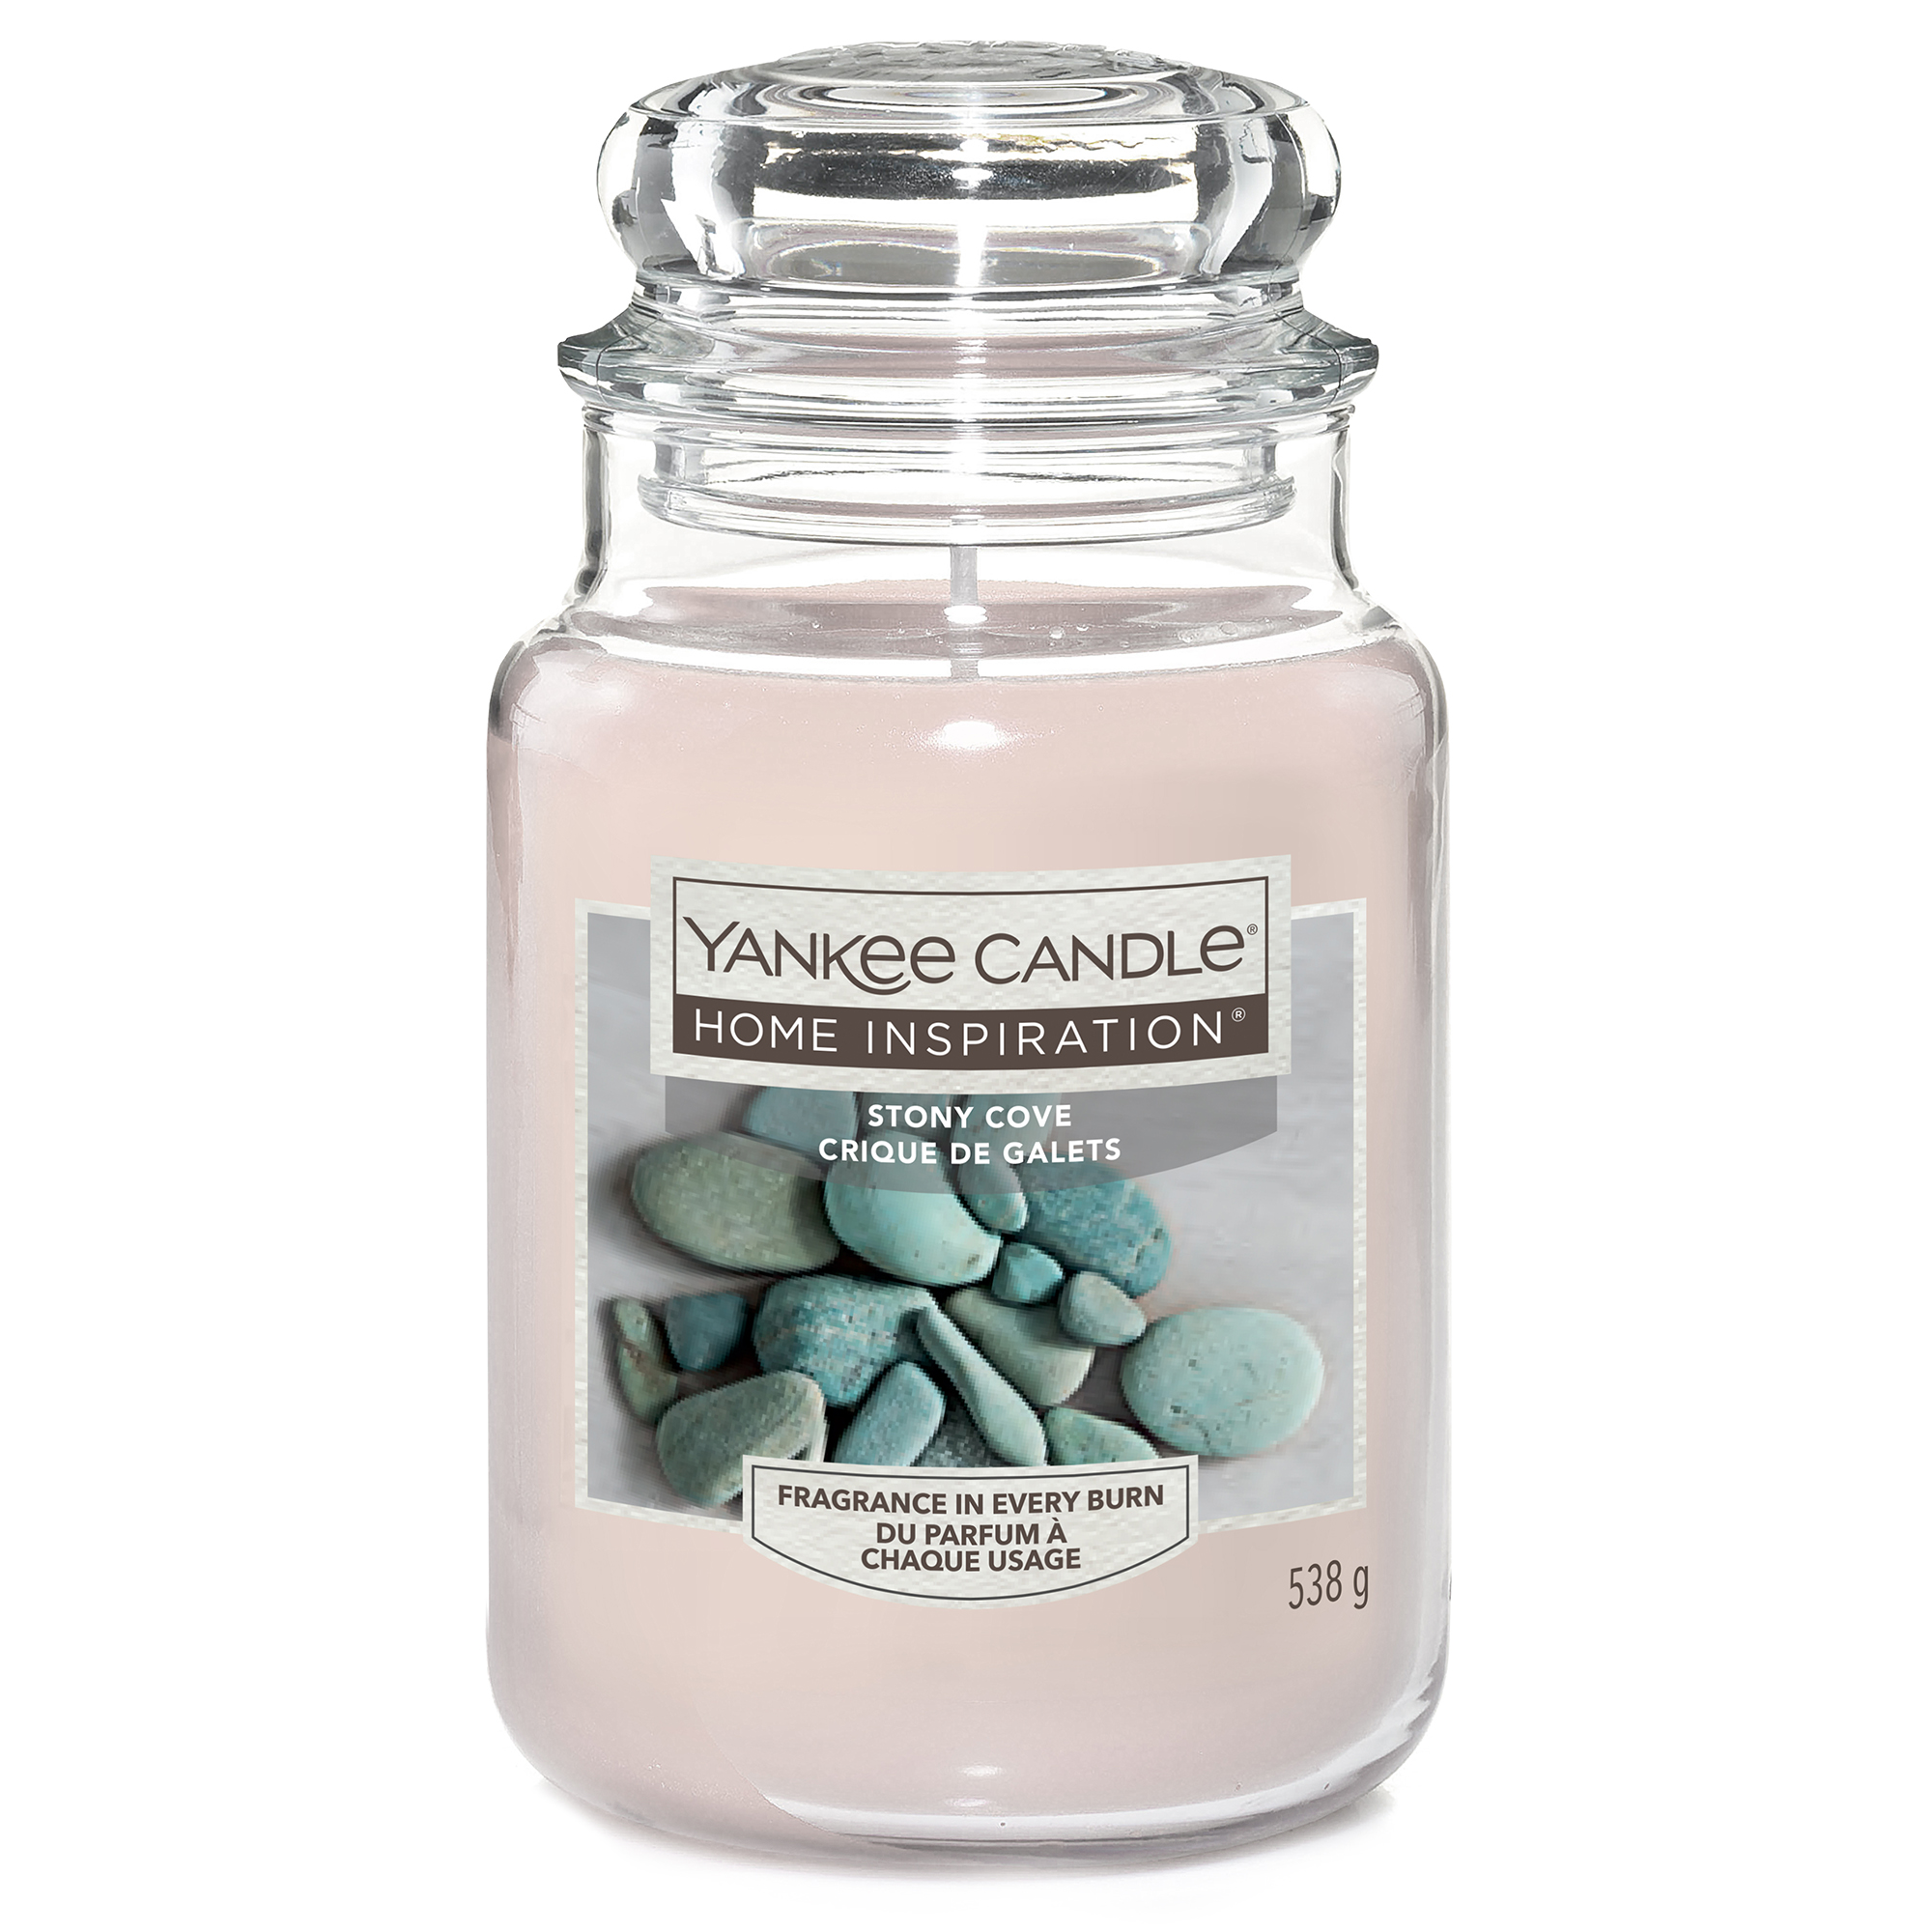 Large Home Inspiration Yankee Candle - Stony Cove